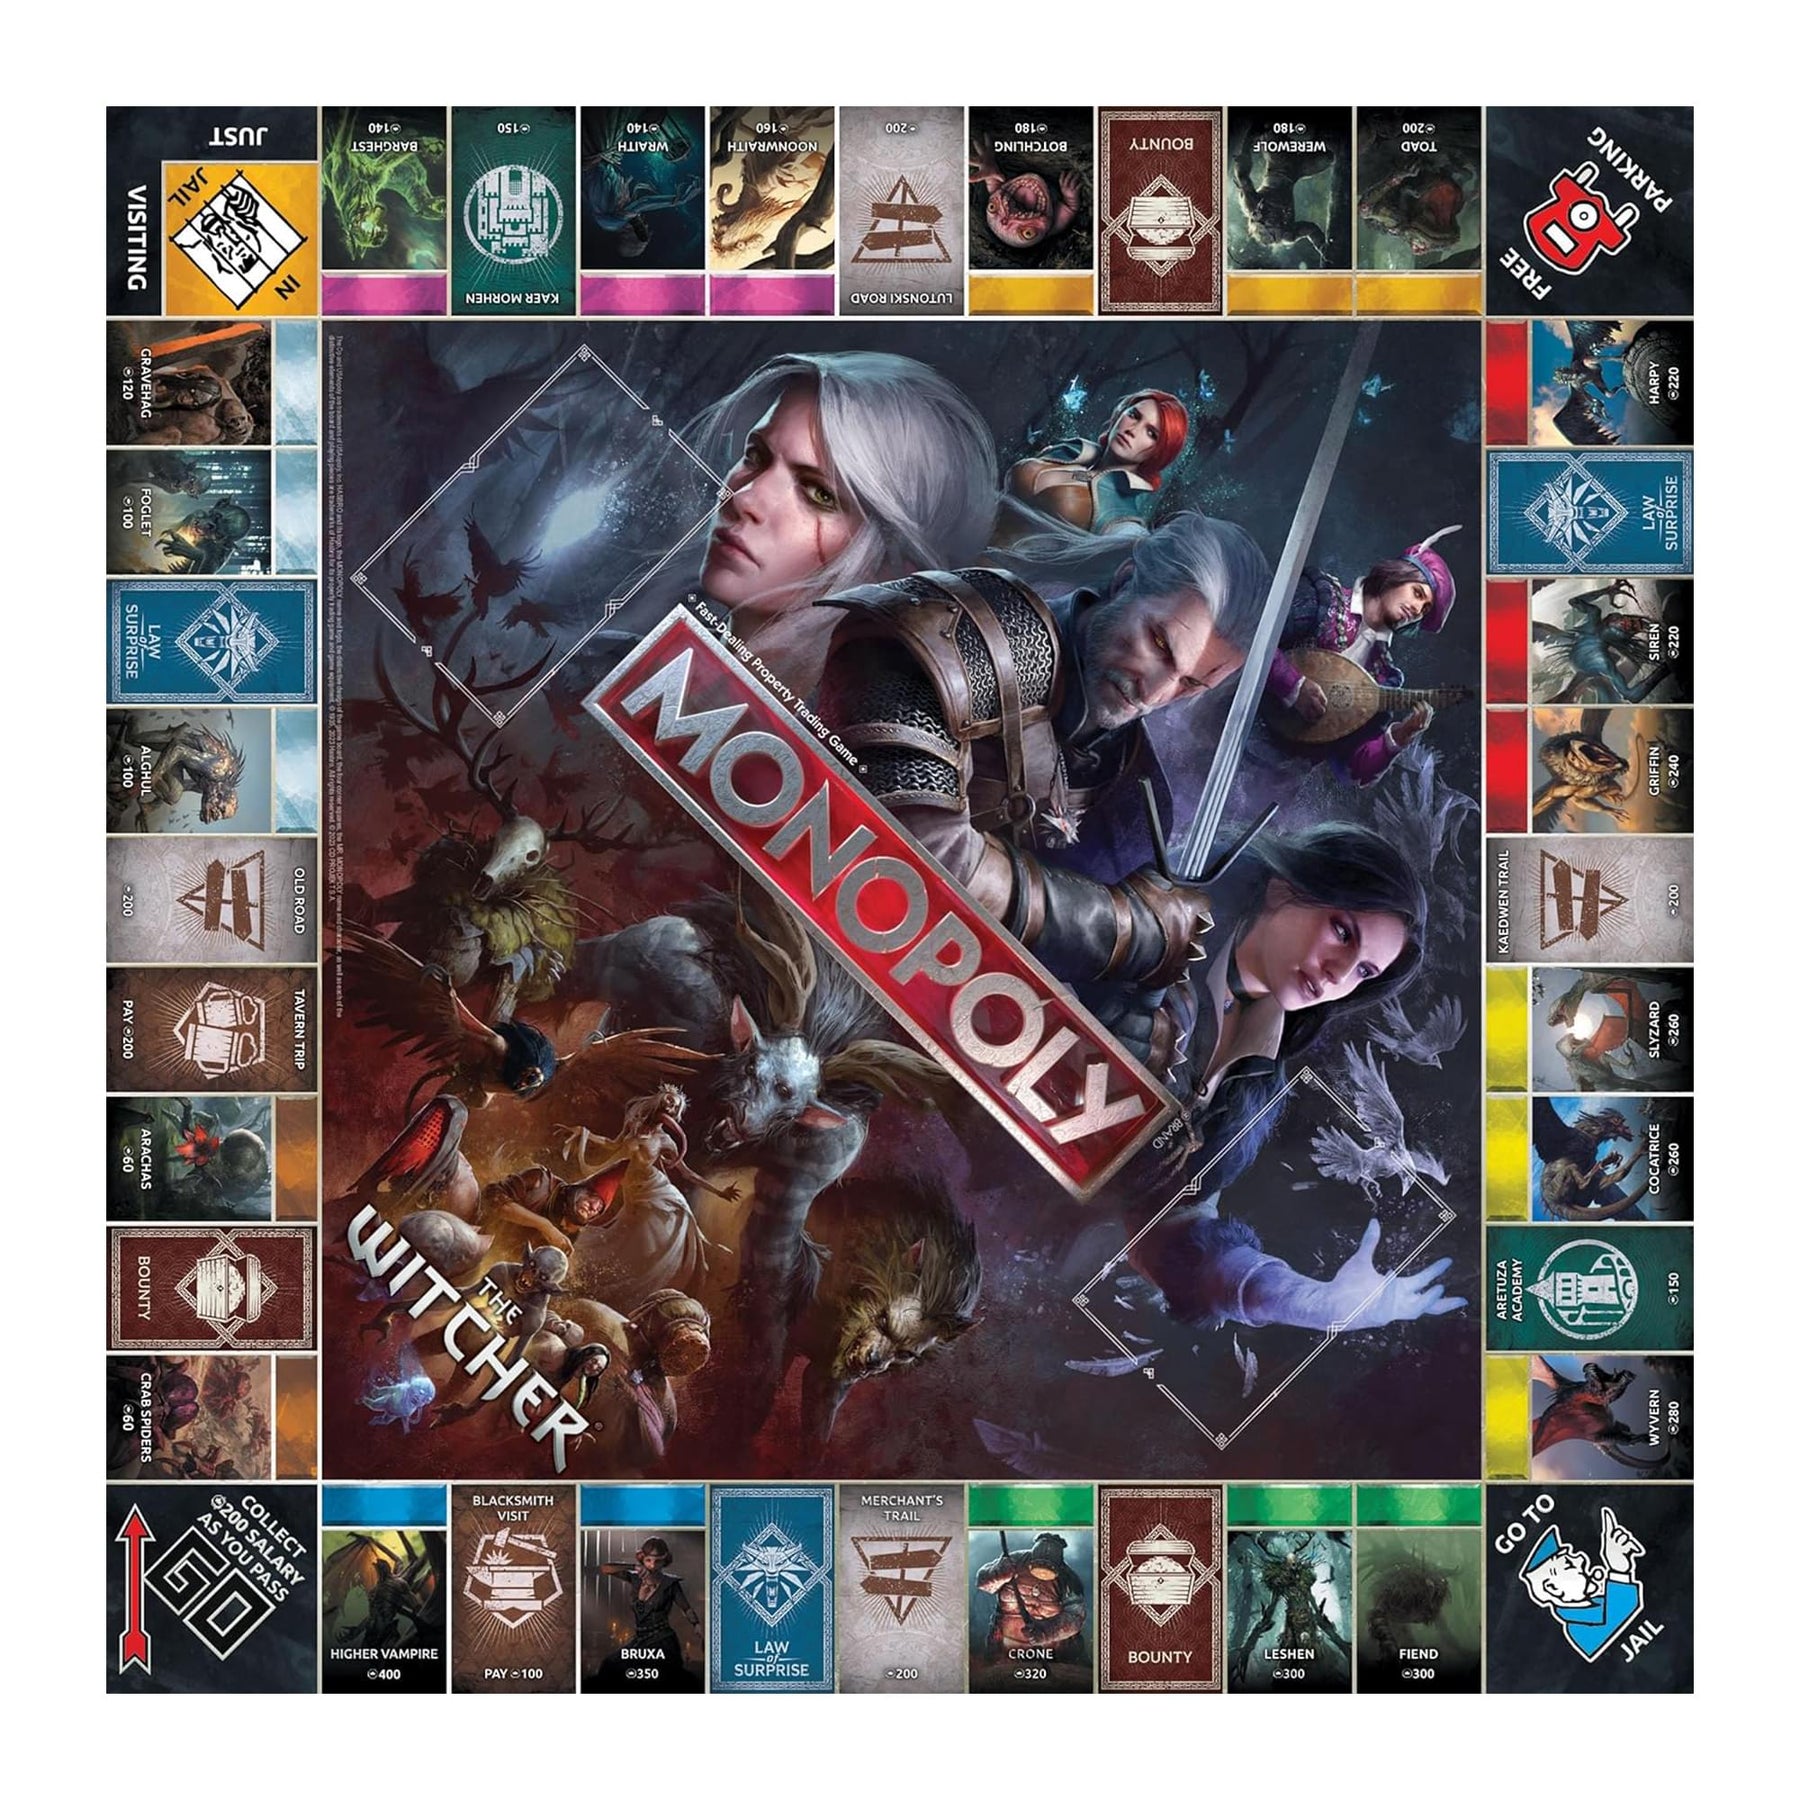 The Witcher Monopoly Board Game